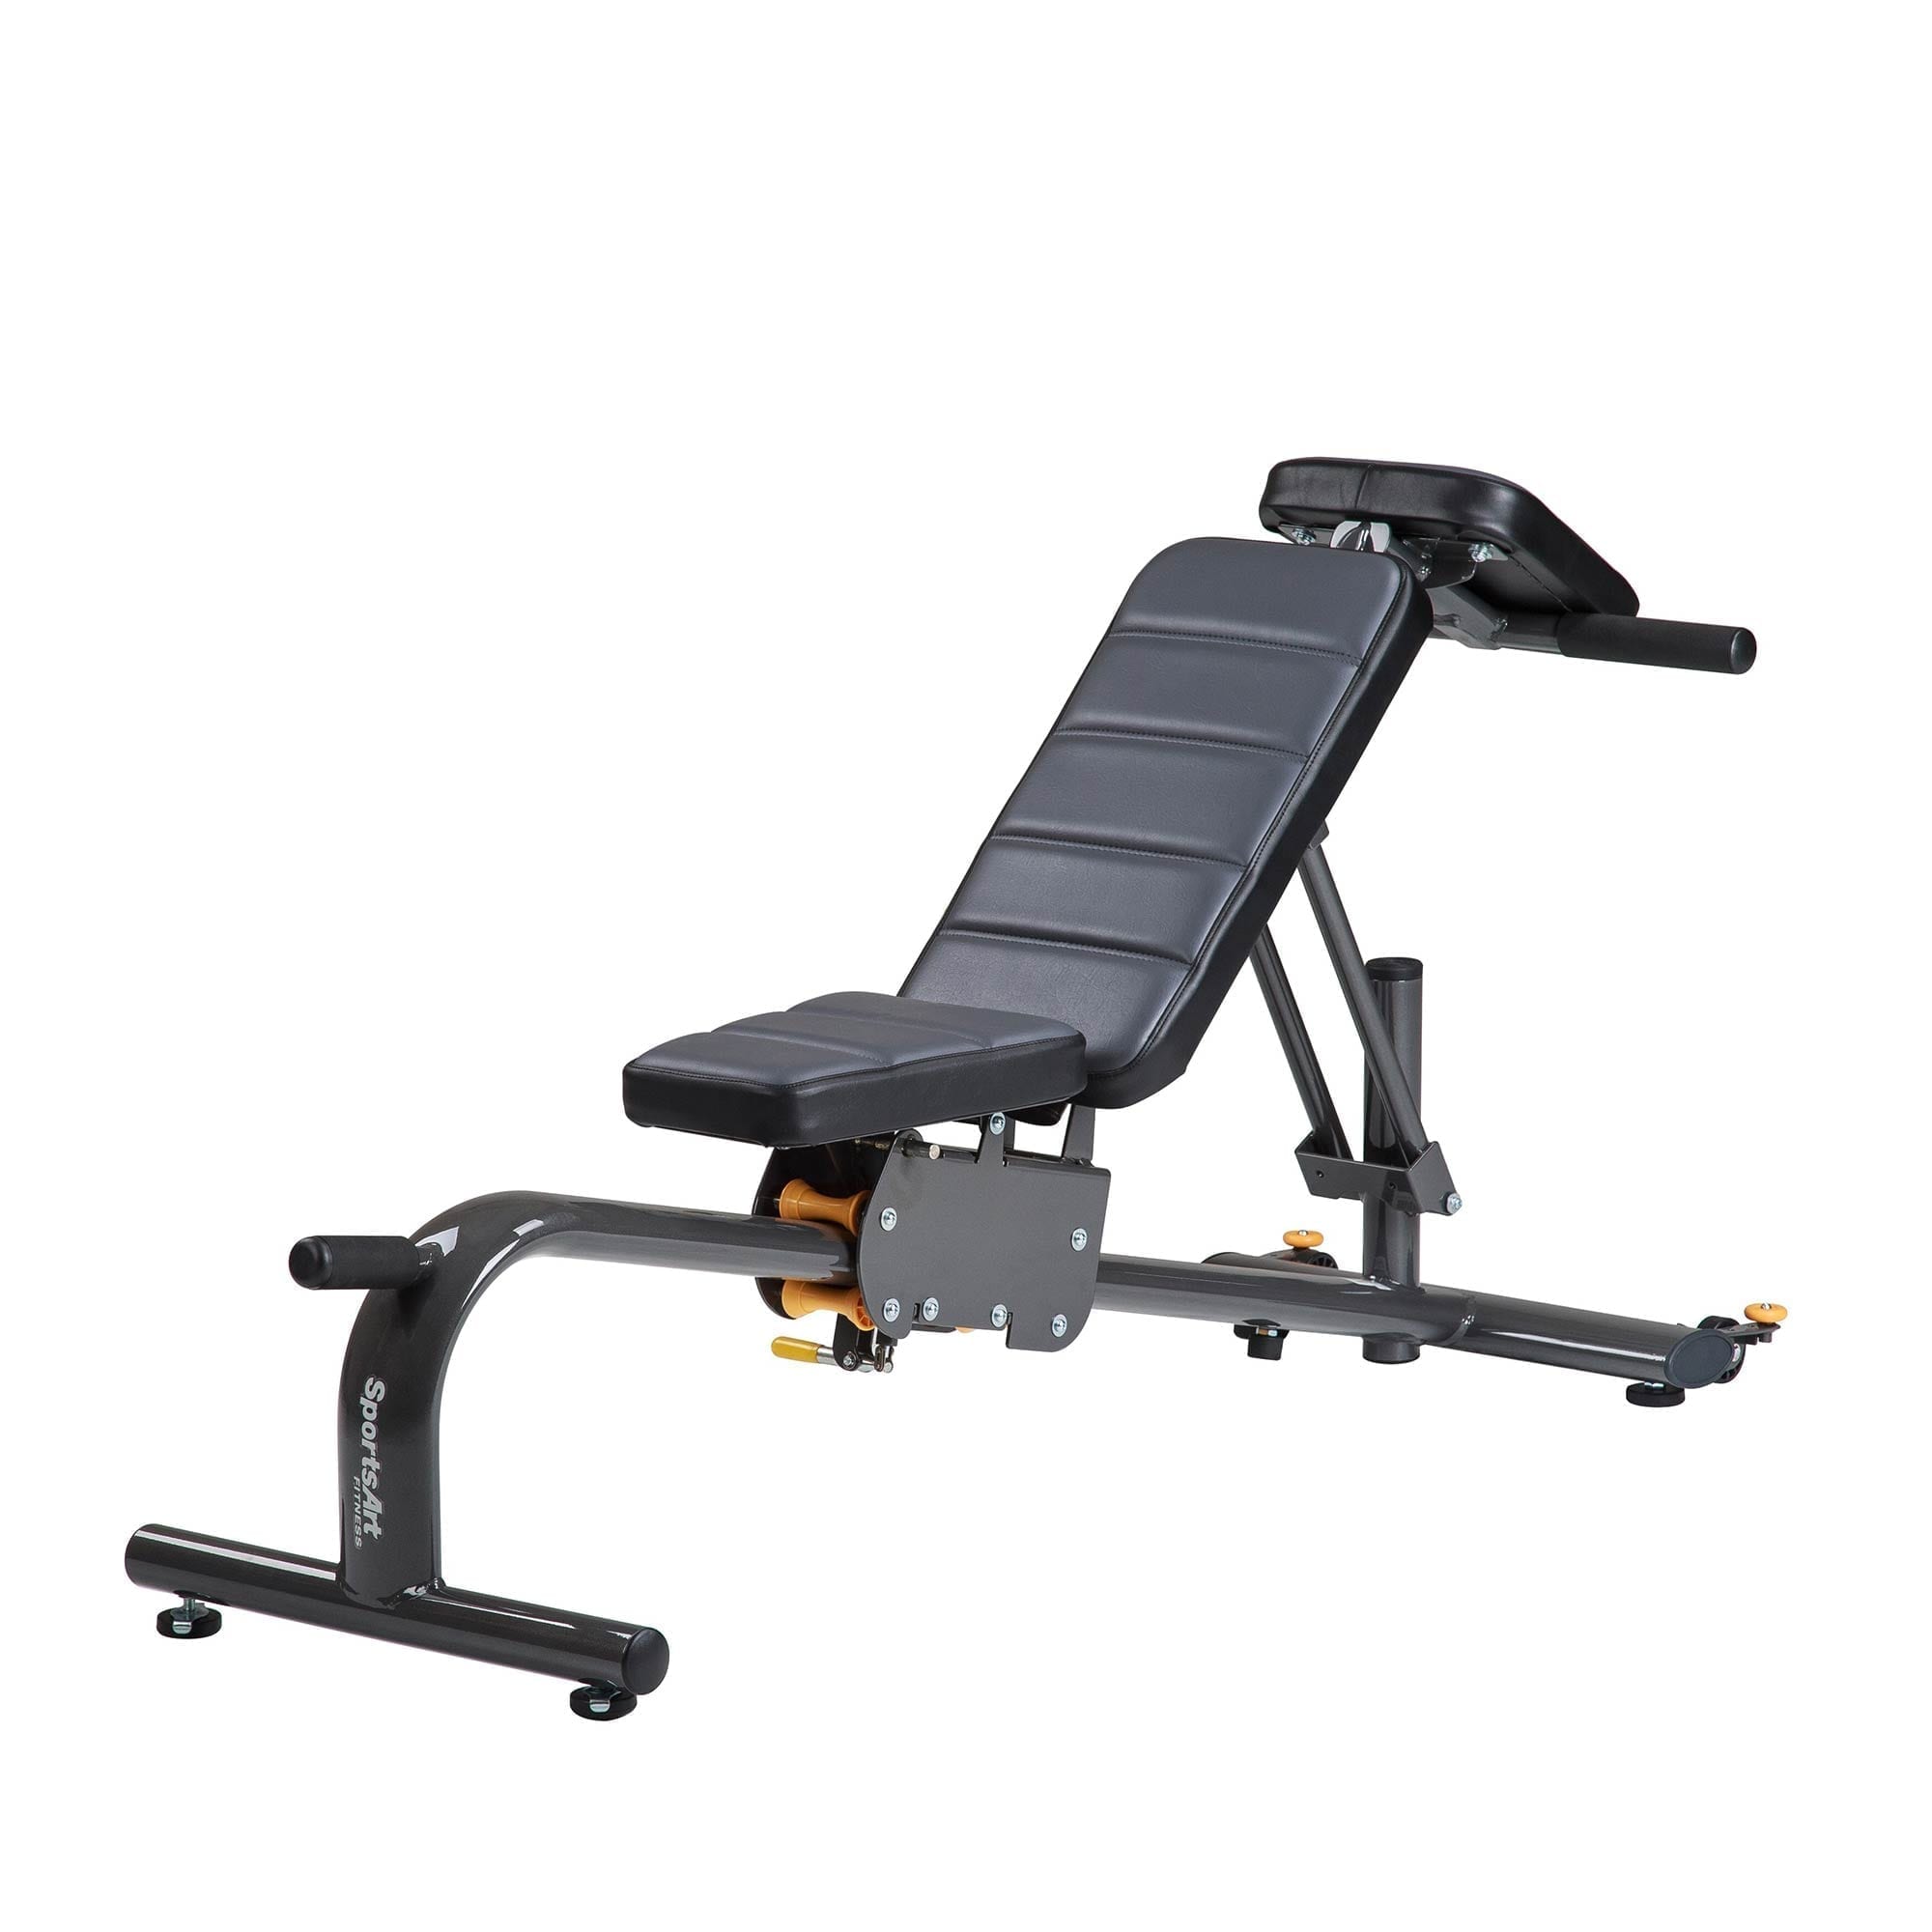 PERFORMANCE SERIES SINGLE STACK FUNCTIONAL TRAINER GYM WITH MULTI-ANGLE BENCH – SPORTSART (A93) 4